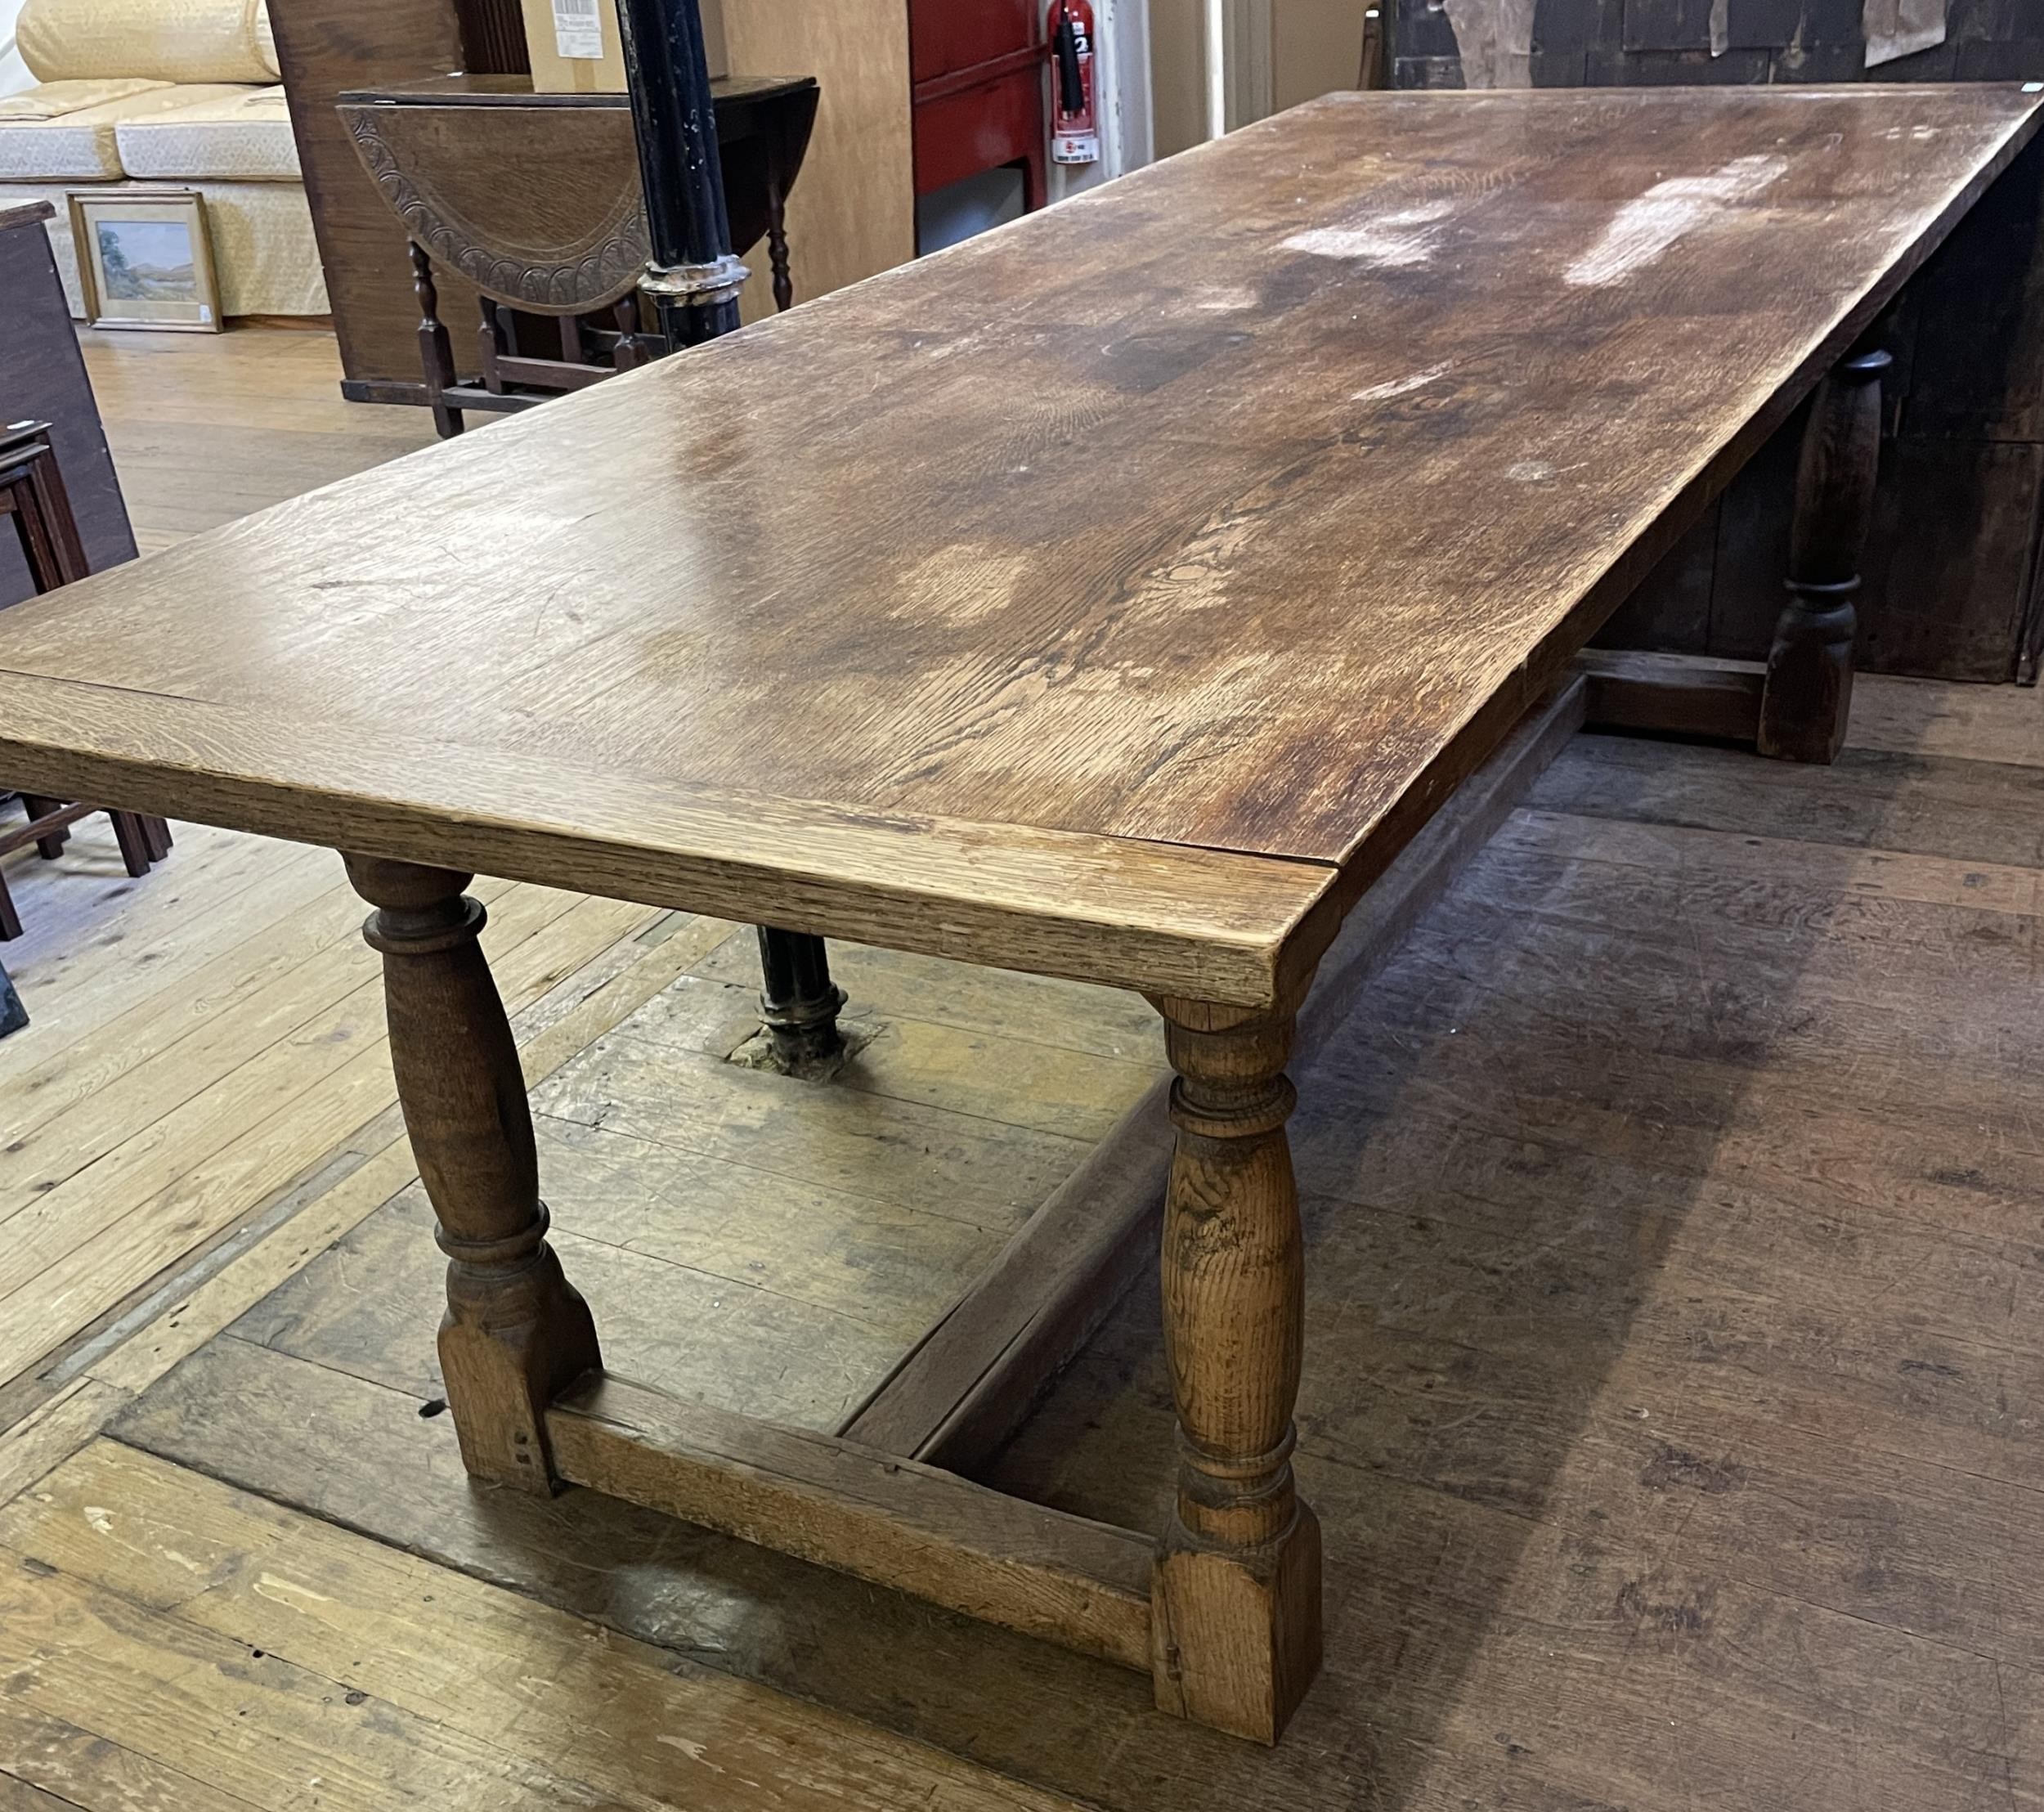 An oak  refrectory table dining table, the top 225 cm x 86 cm with, a later extension 63 cm wide